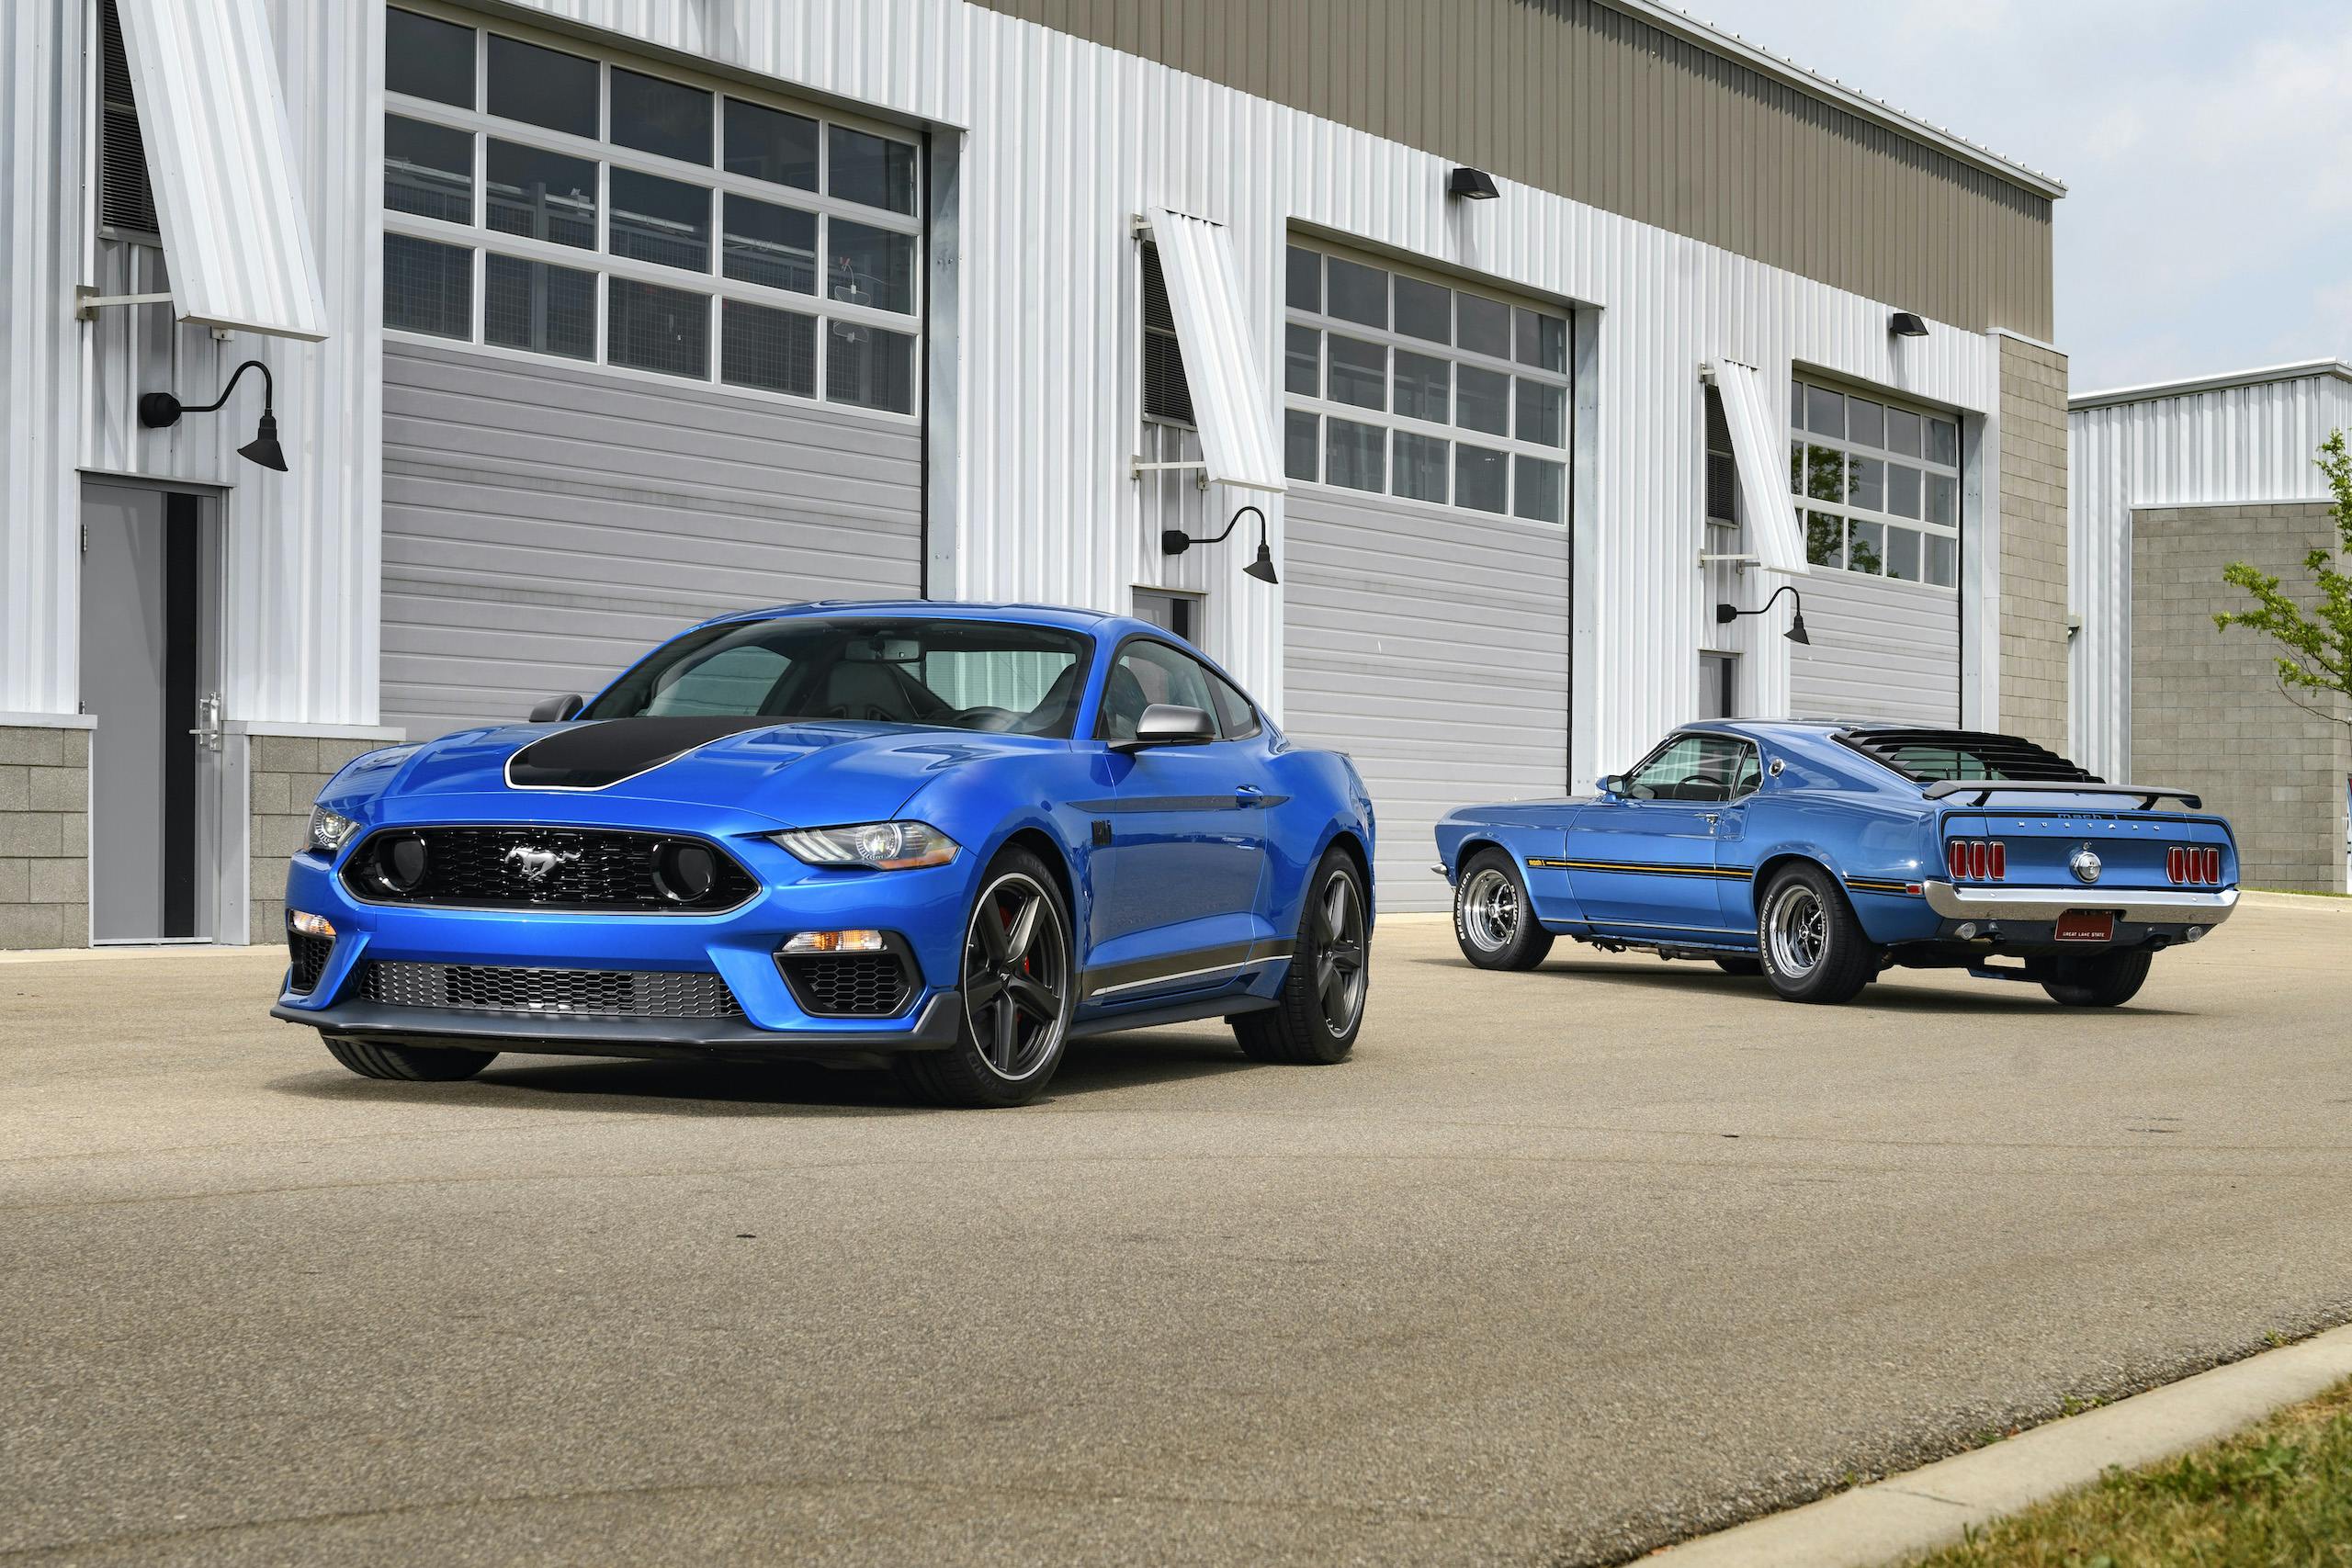 2021 Mustang Mach 1 blue front three-quarter with classic